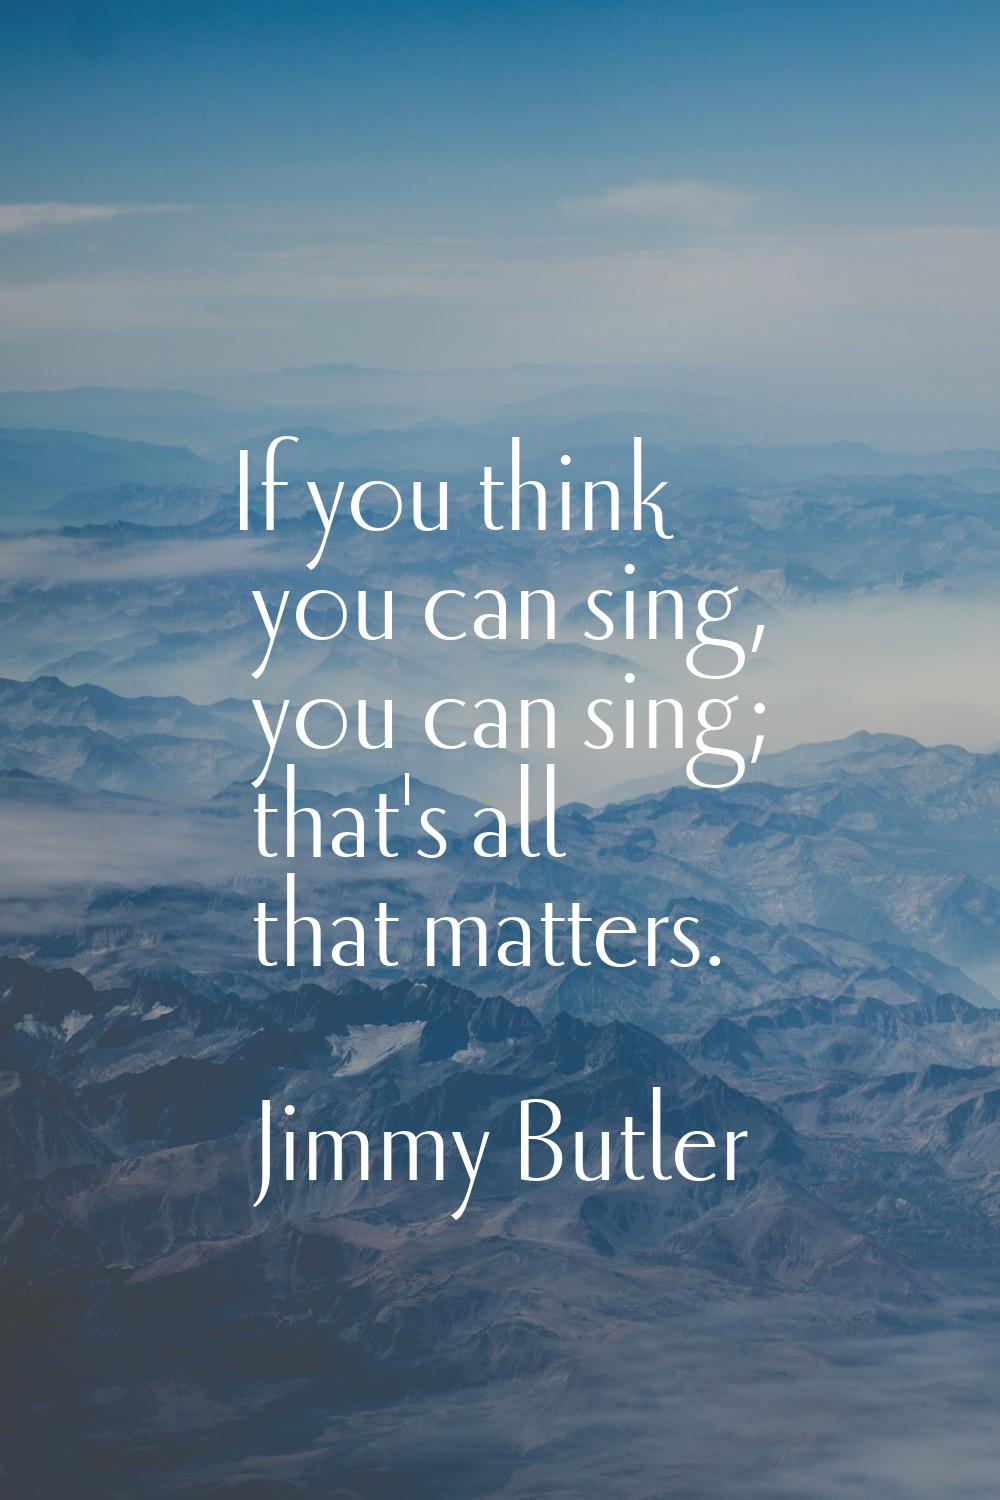 If you think you can sing, you can sing; that's all that matters.